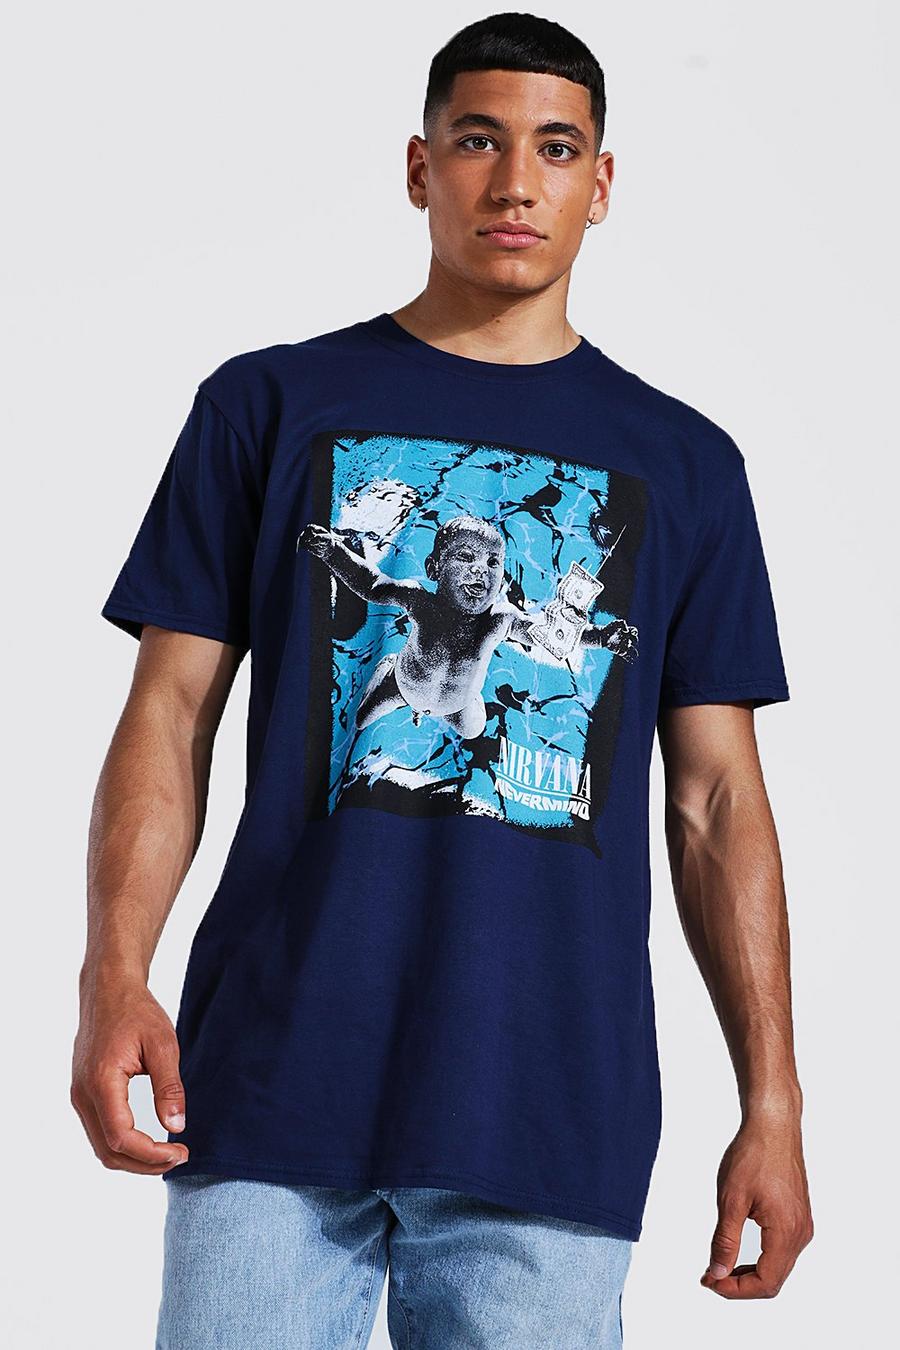 T-shirt oversize ufficiale dei Nirvana Nevermind, Navy blu oltremare image number 1